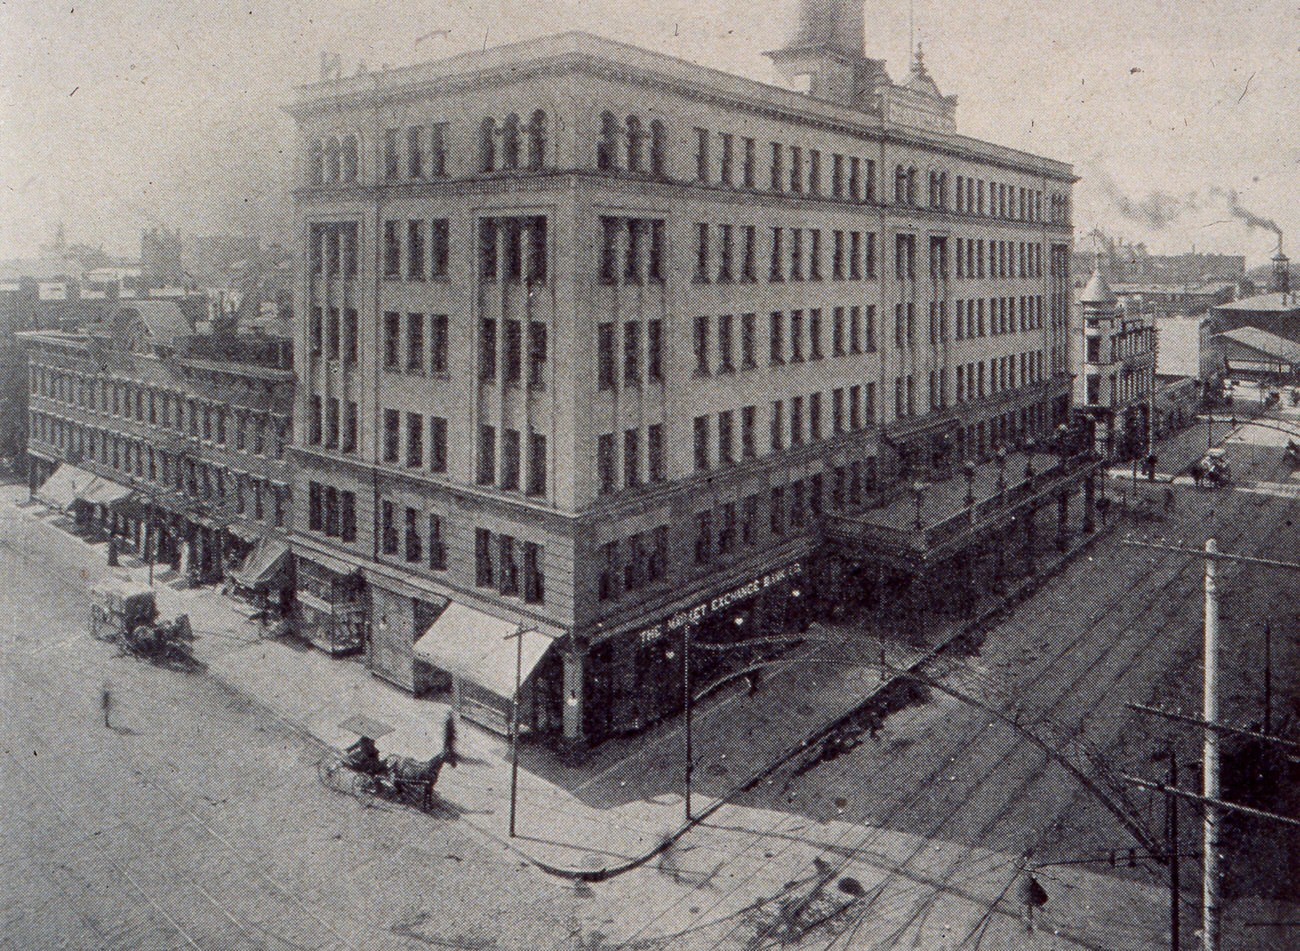 Hartman Hotel, a favorite for private dinners, opened in 1901 and became the Ohio Building in 1921, Circa 1909.